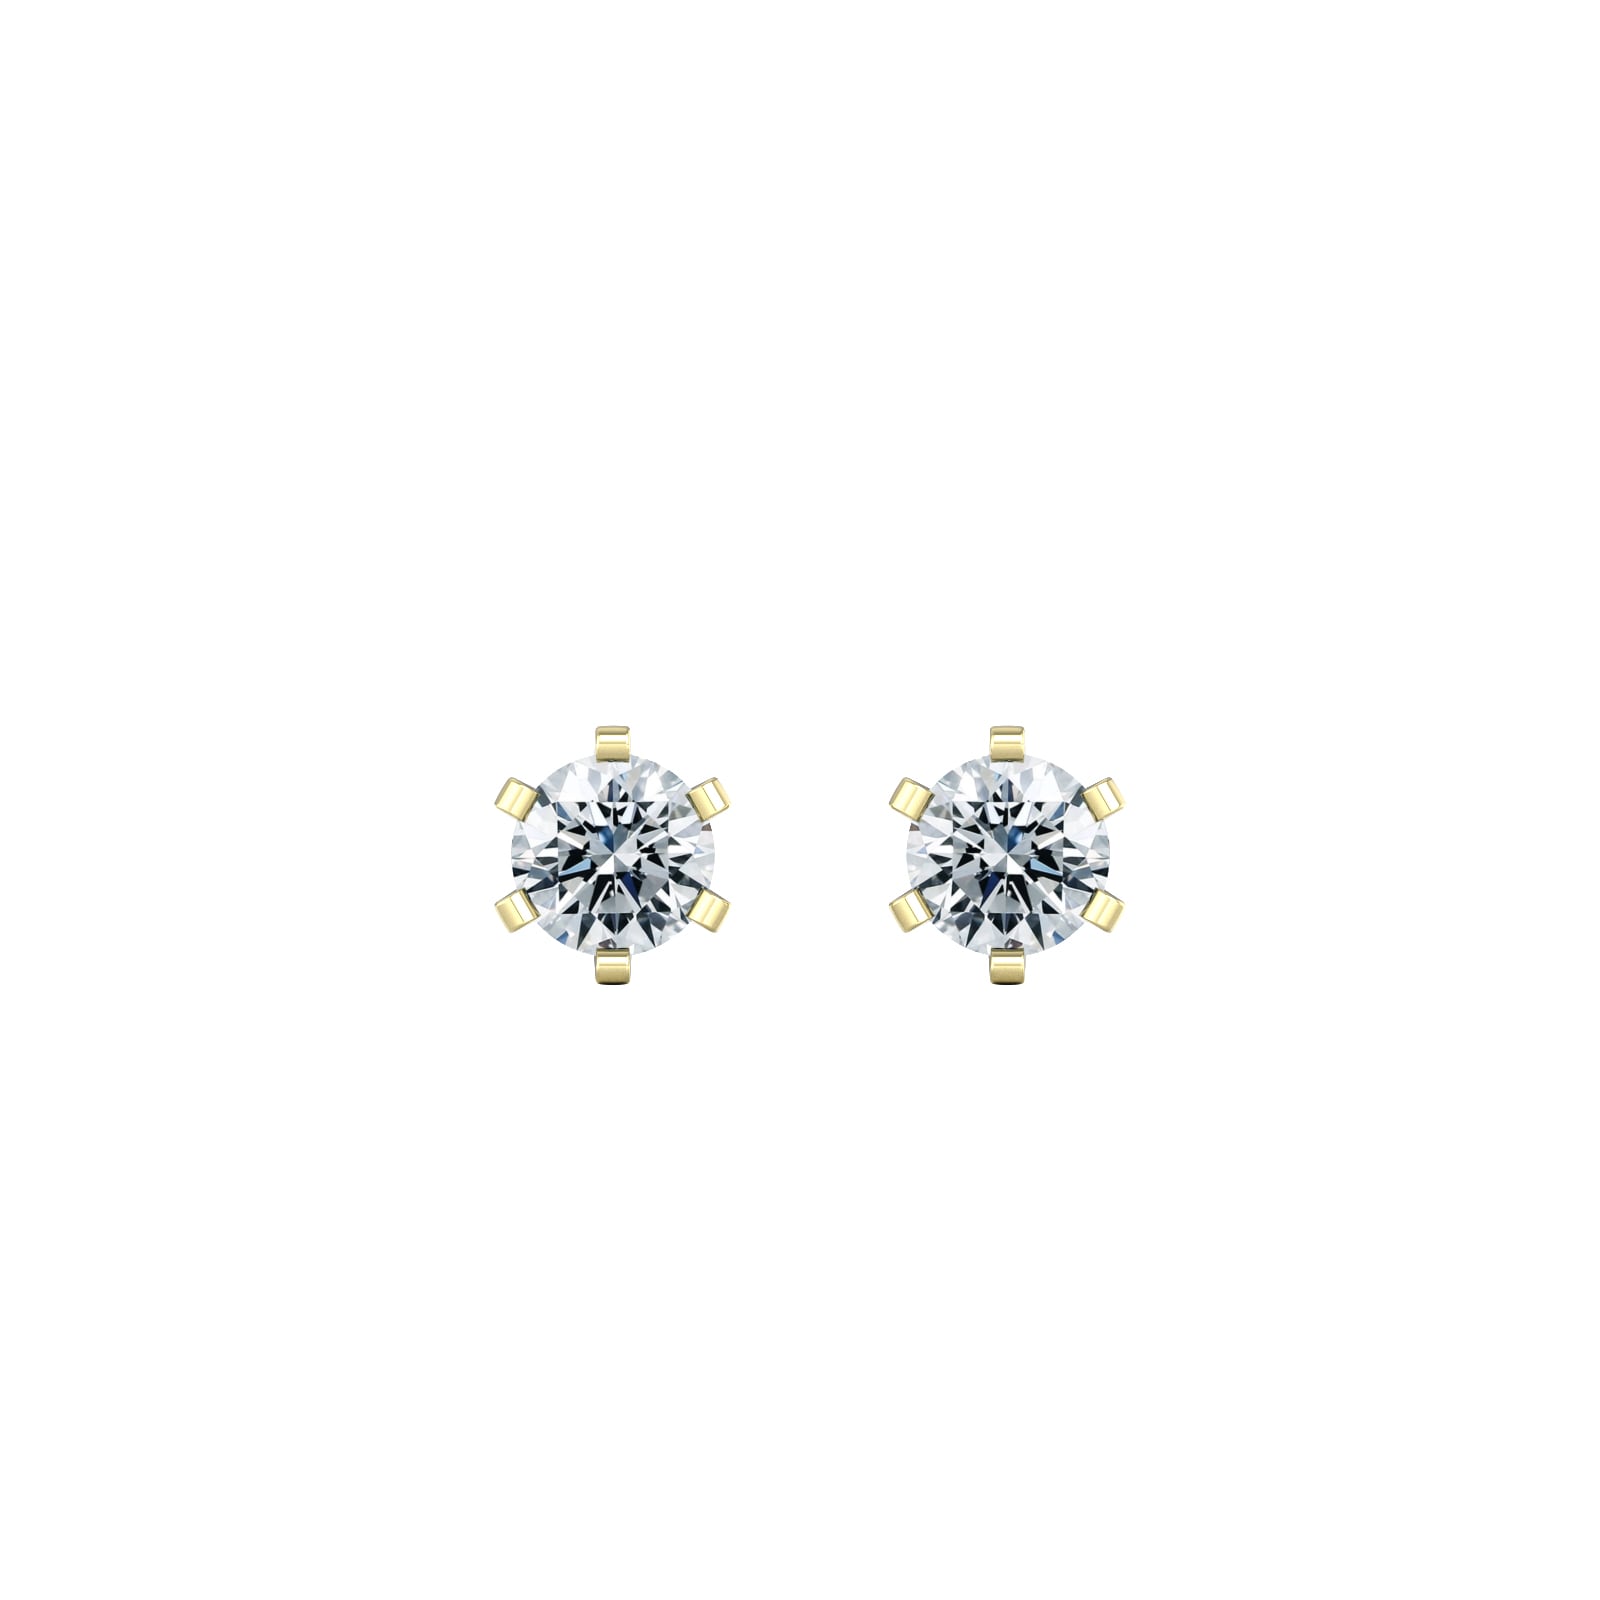 9ct Yellow Gold 0.33cttw Solitaire Diamond Stud Earrings